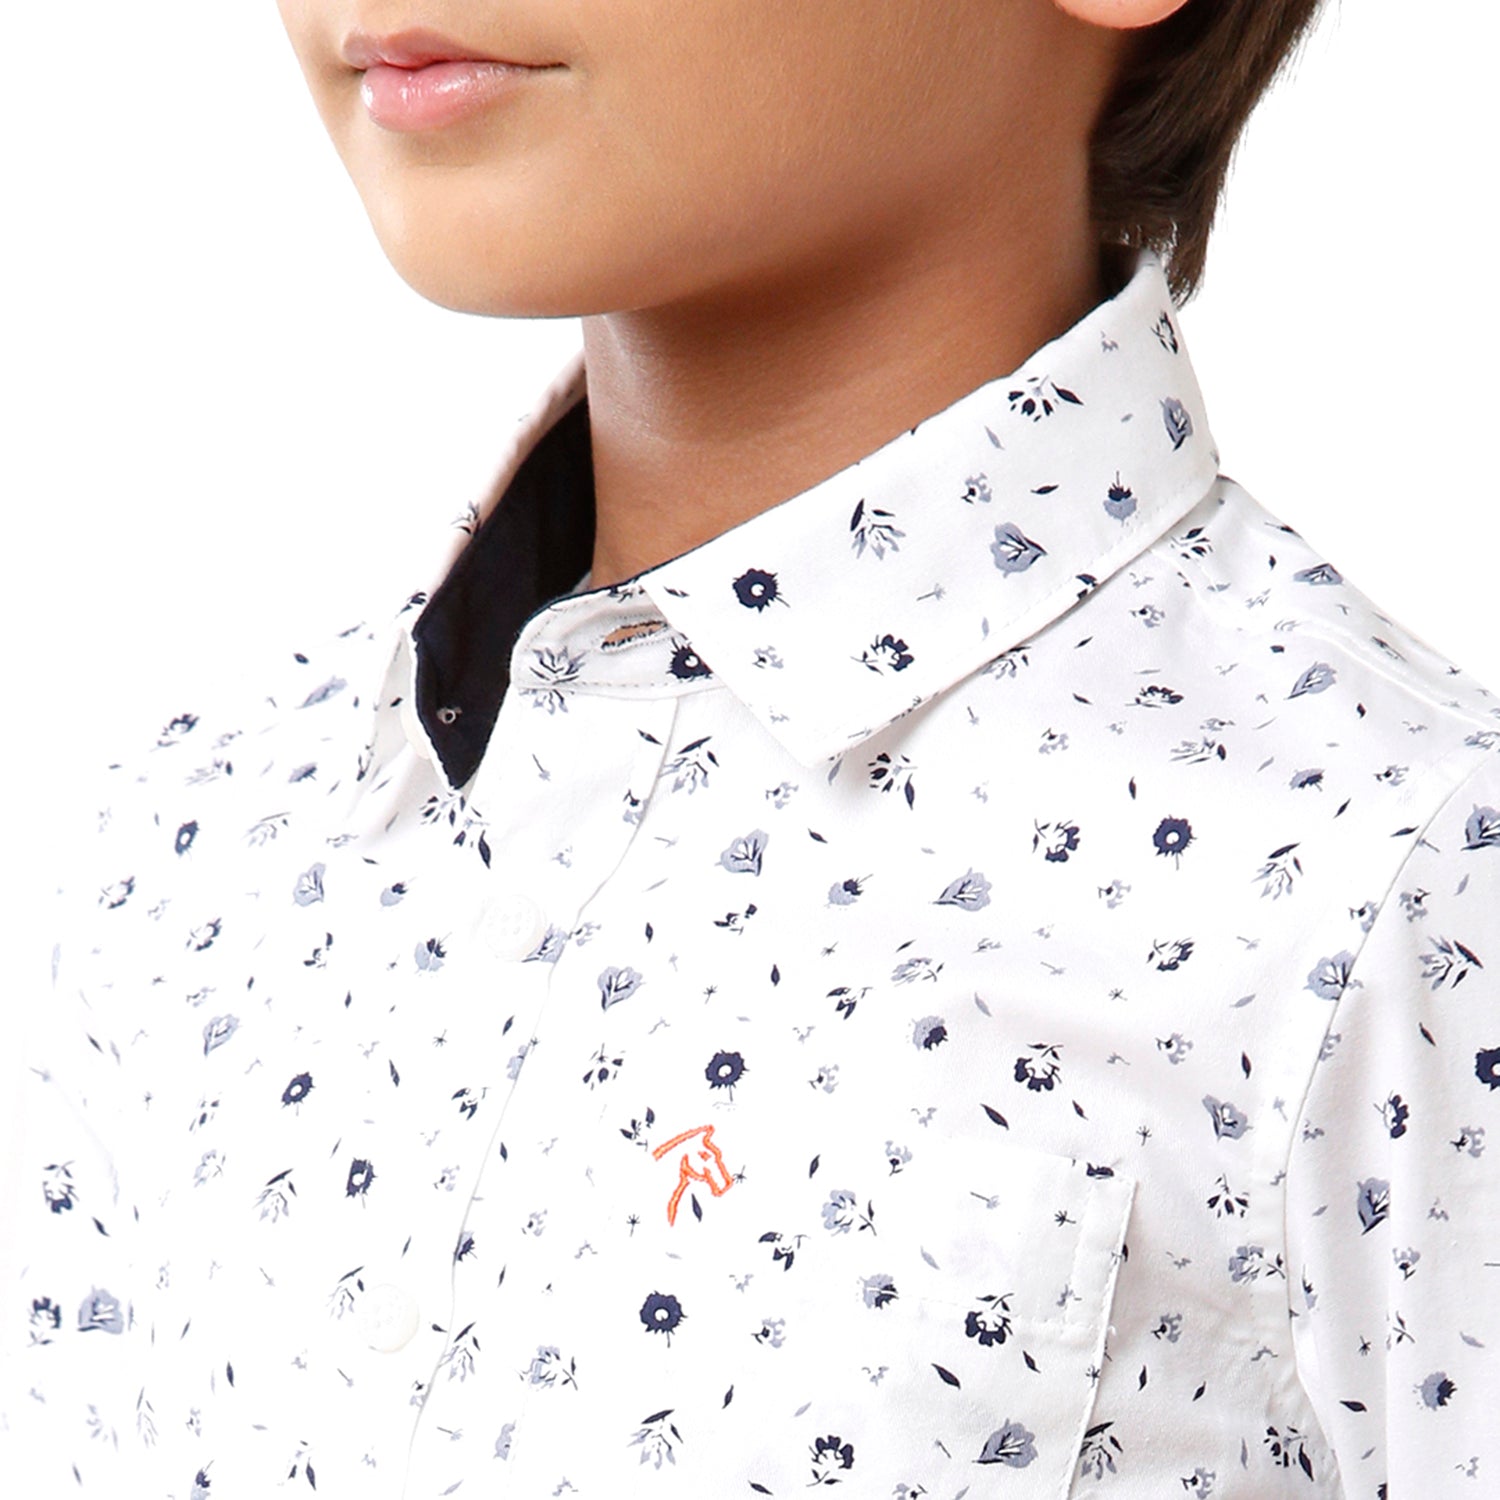 Classic Polo Bro Boys Printed Full Sleeve Slim Fit White Color Shirt - BBSH S2 06 A Shirts Classic Polo 